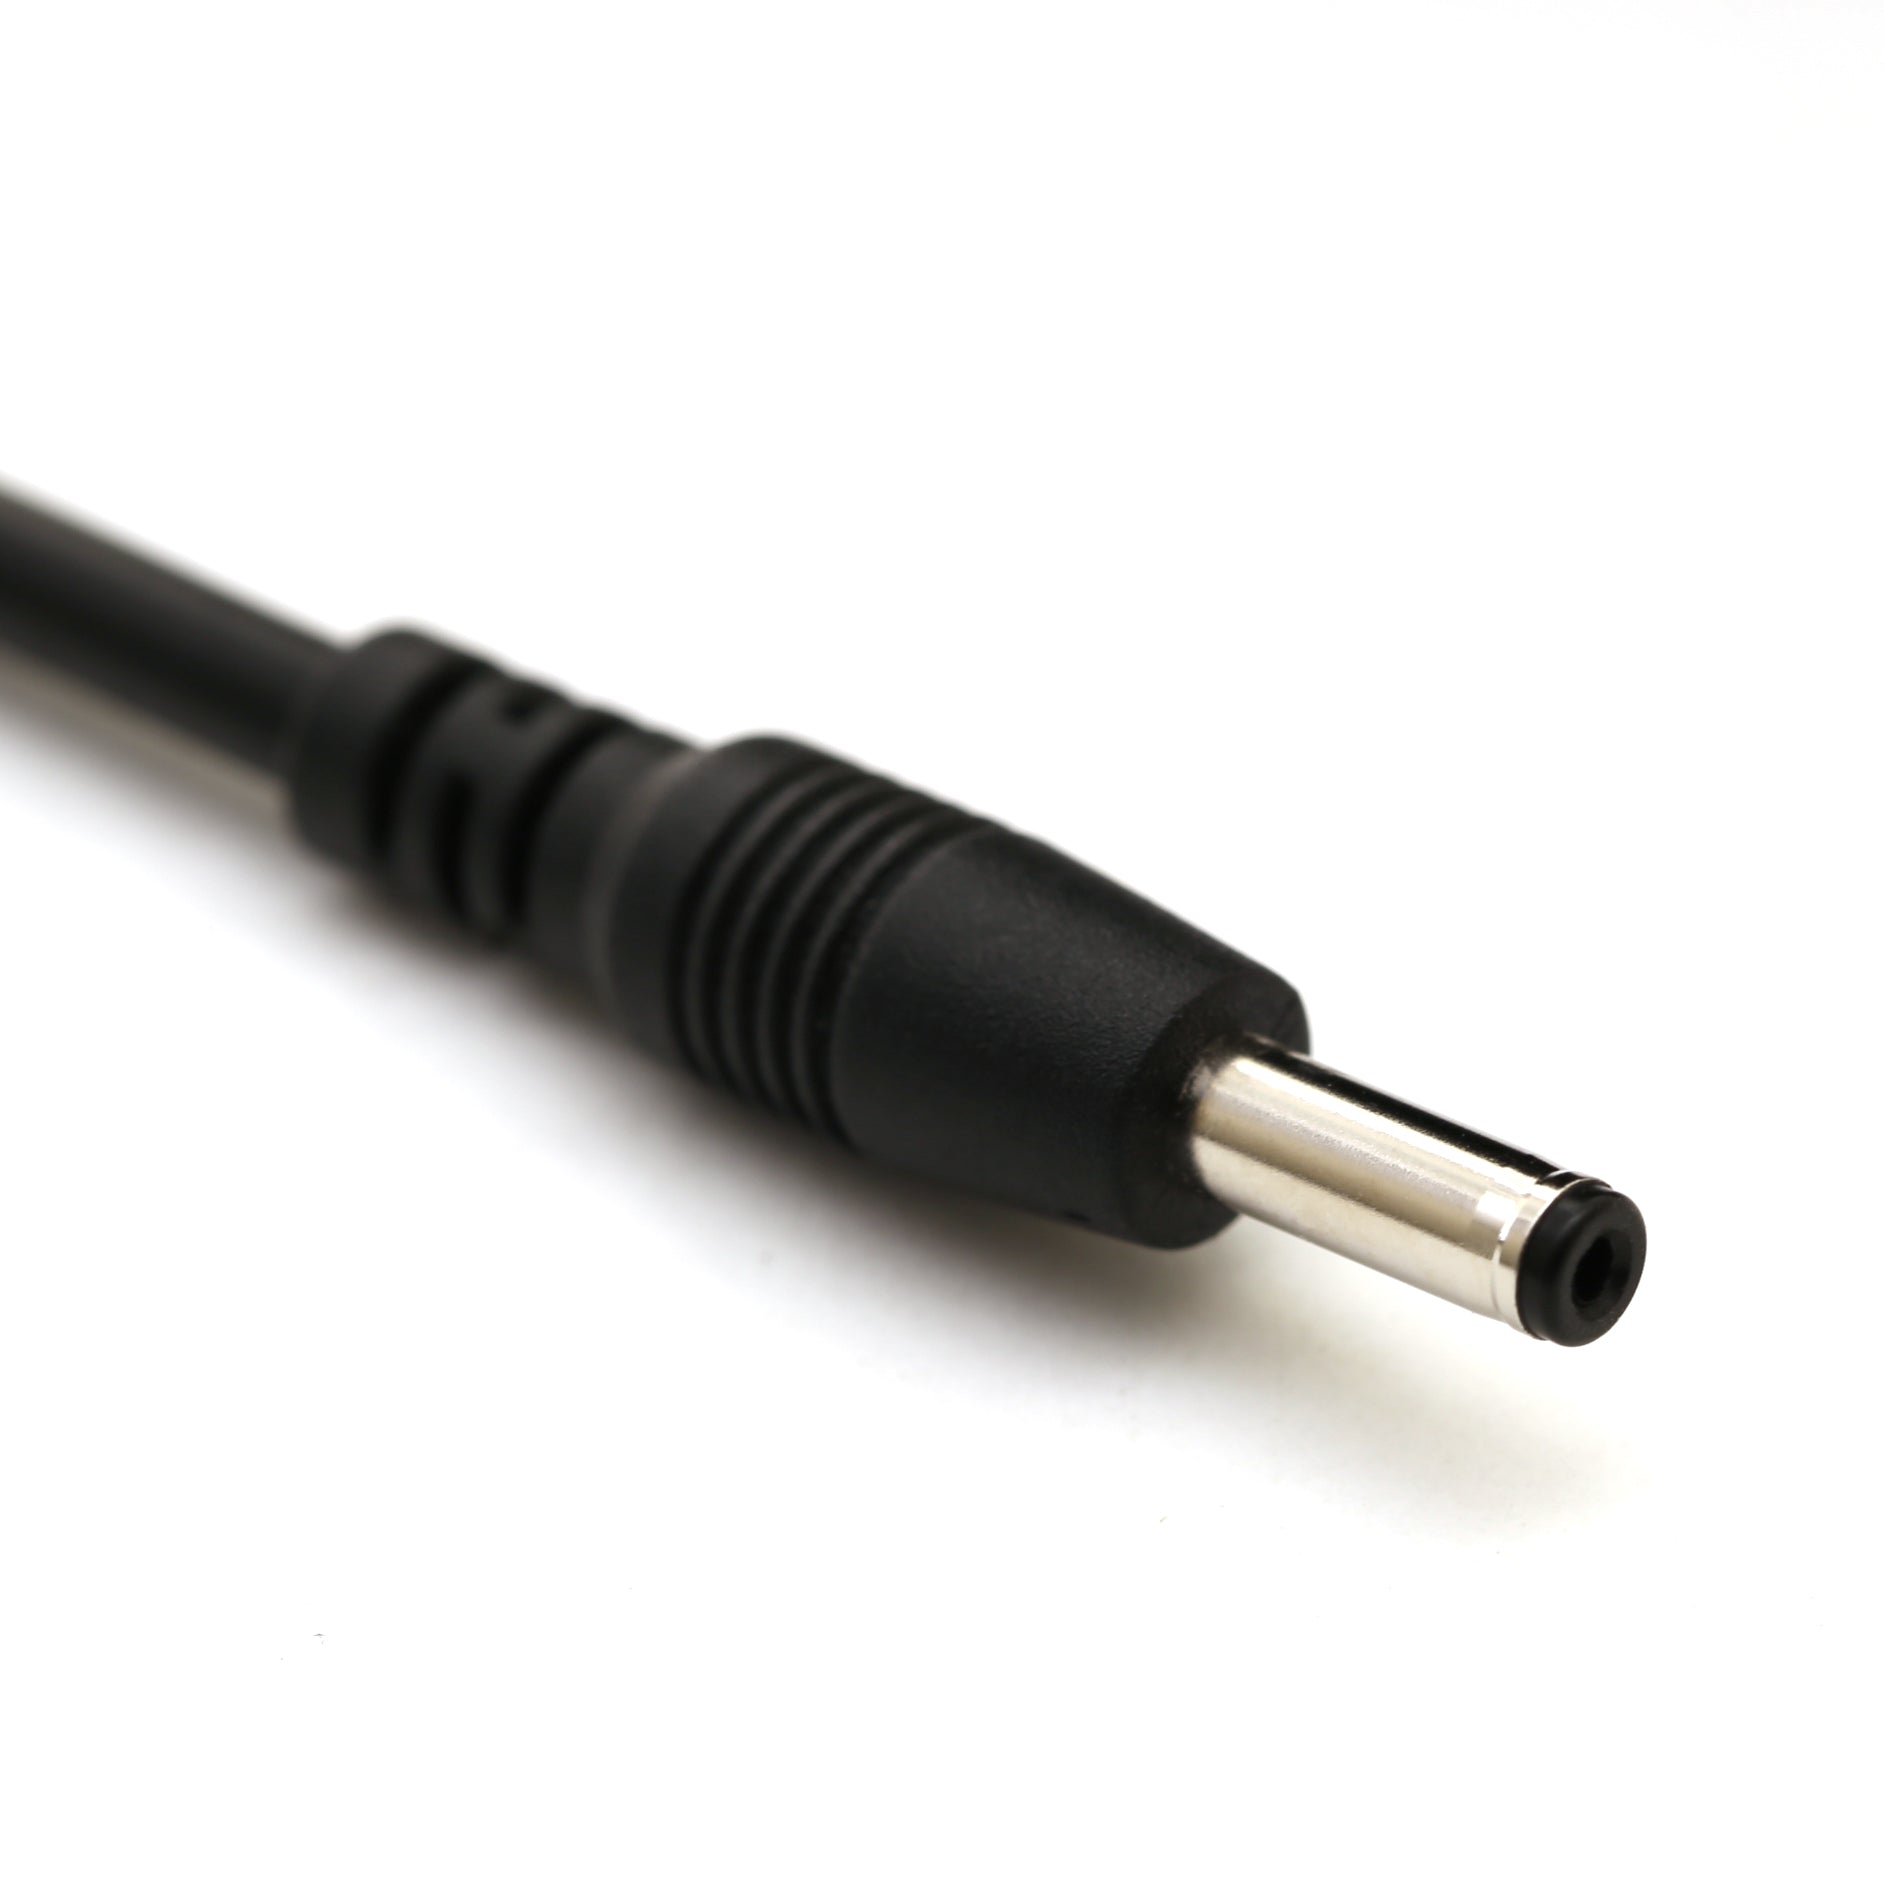 25ft In-Wall Rated Interconnect Cable for Modular LED Under Cabinet Lighting (Black)